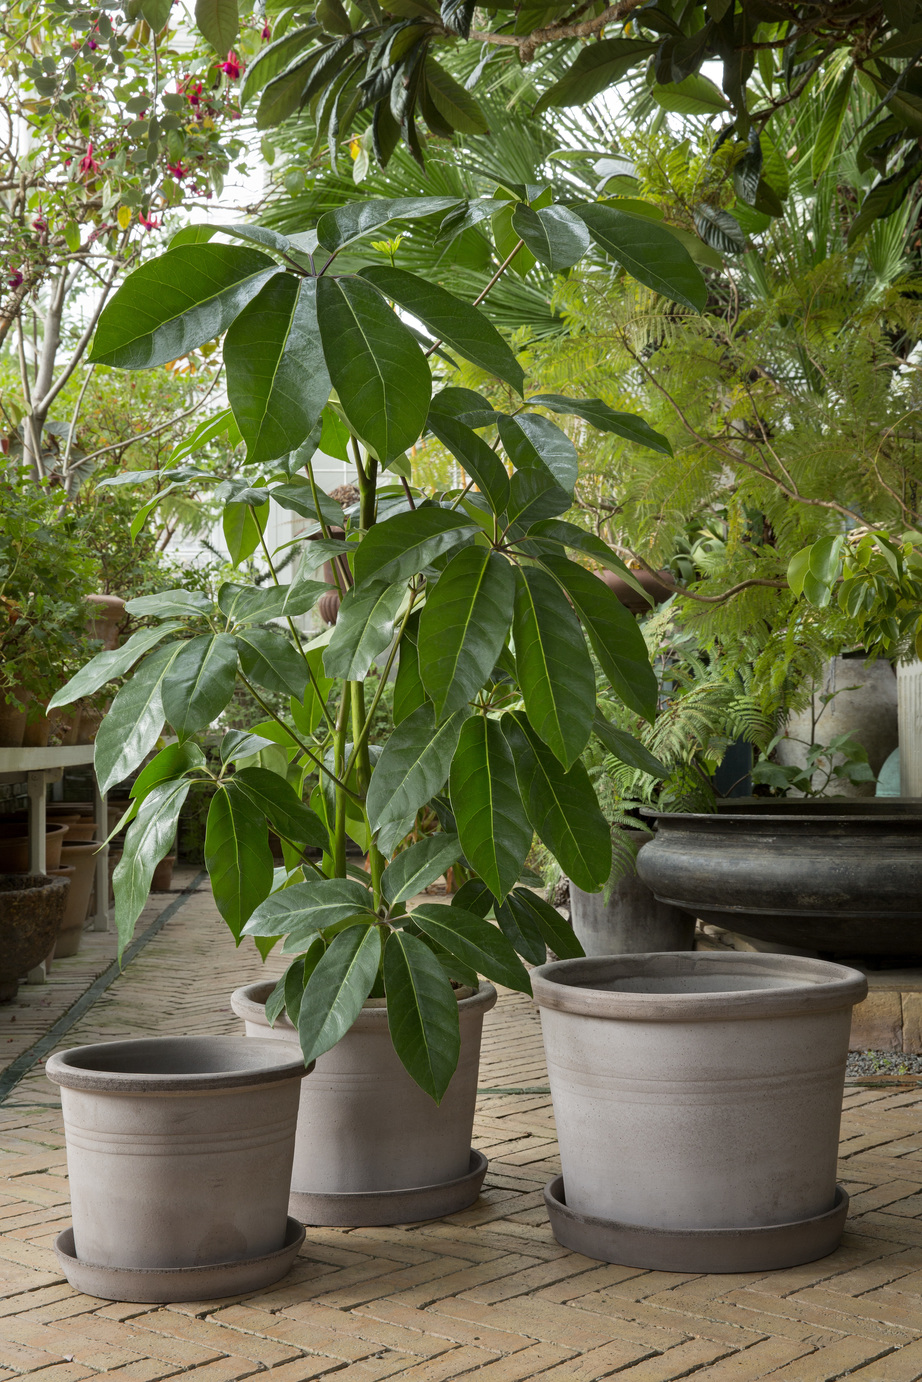 Grey cylindrical outdoor pots in a greenhouse with plants.